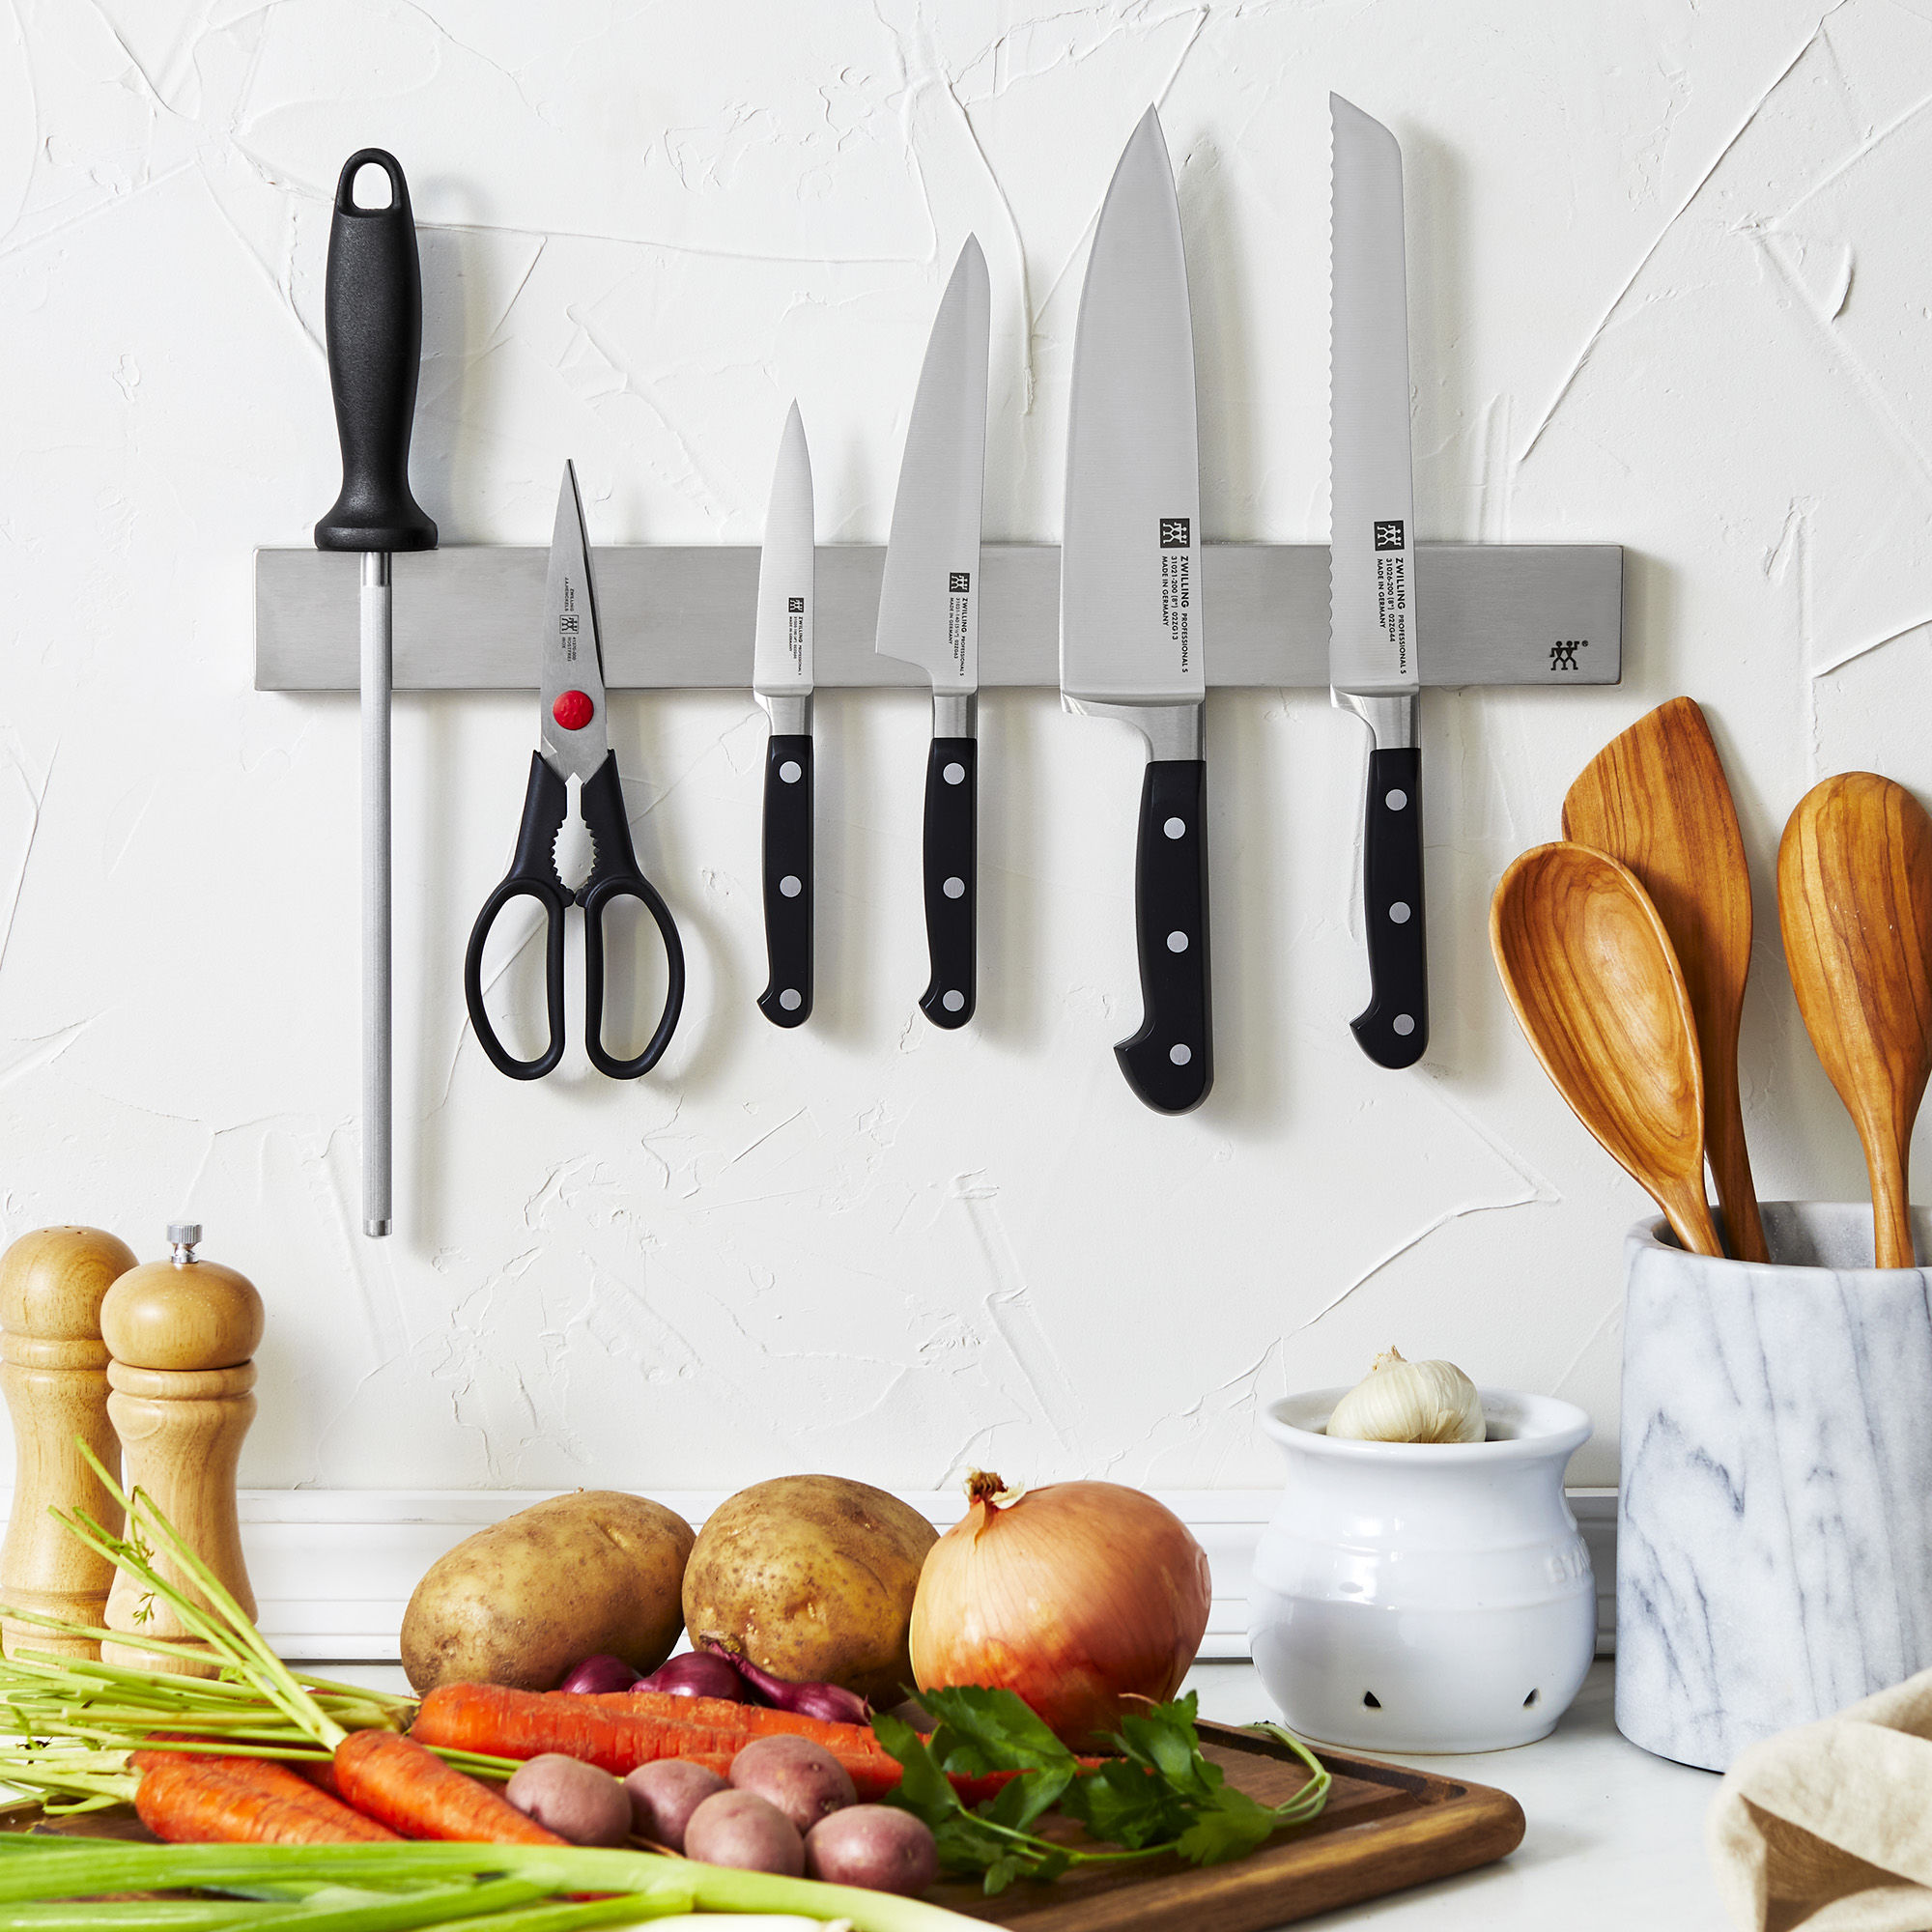 https://www.zwilling.com/on/demandware.static/-/Sites-zwilling-master-catalog/default/dw94a5b8a6/images/large/750033395.jpg